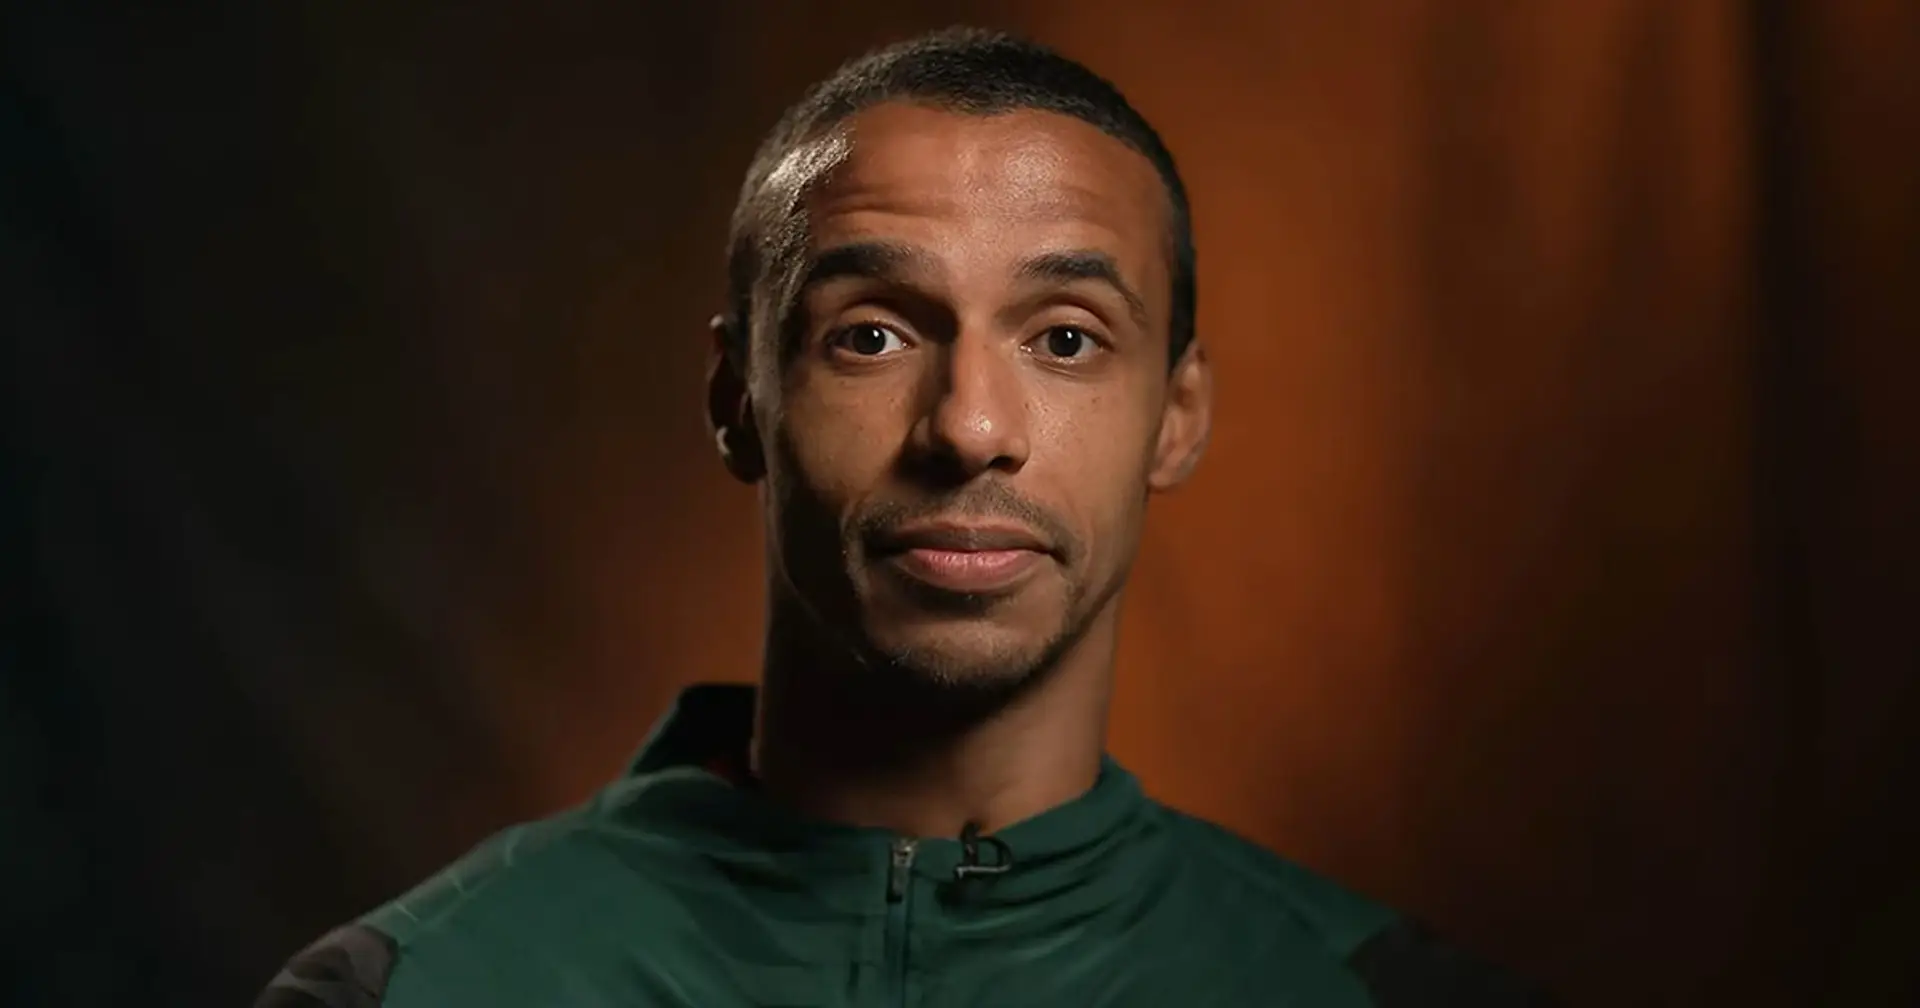 Matip says he wants to stay at Liverpool until retirement: 'You don't just walk away'